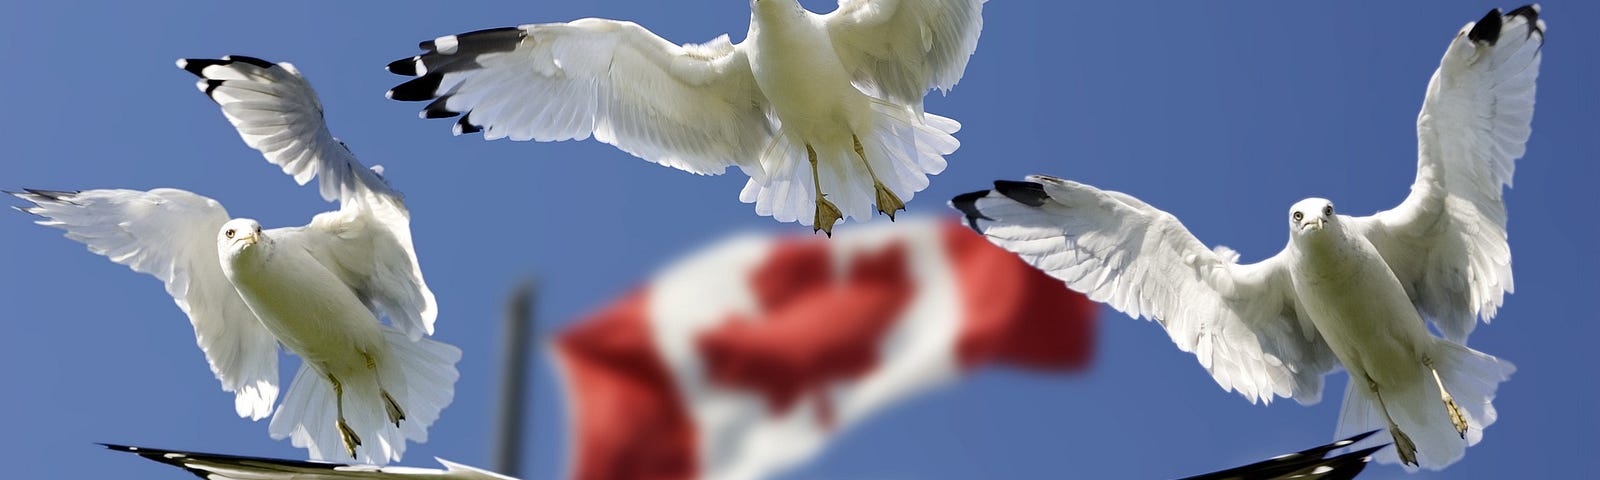 4 seagulls fly in a circle formation, framing an out-of-focus Canadian flag behind them.